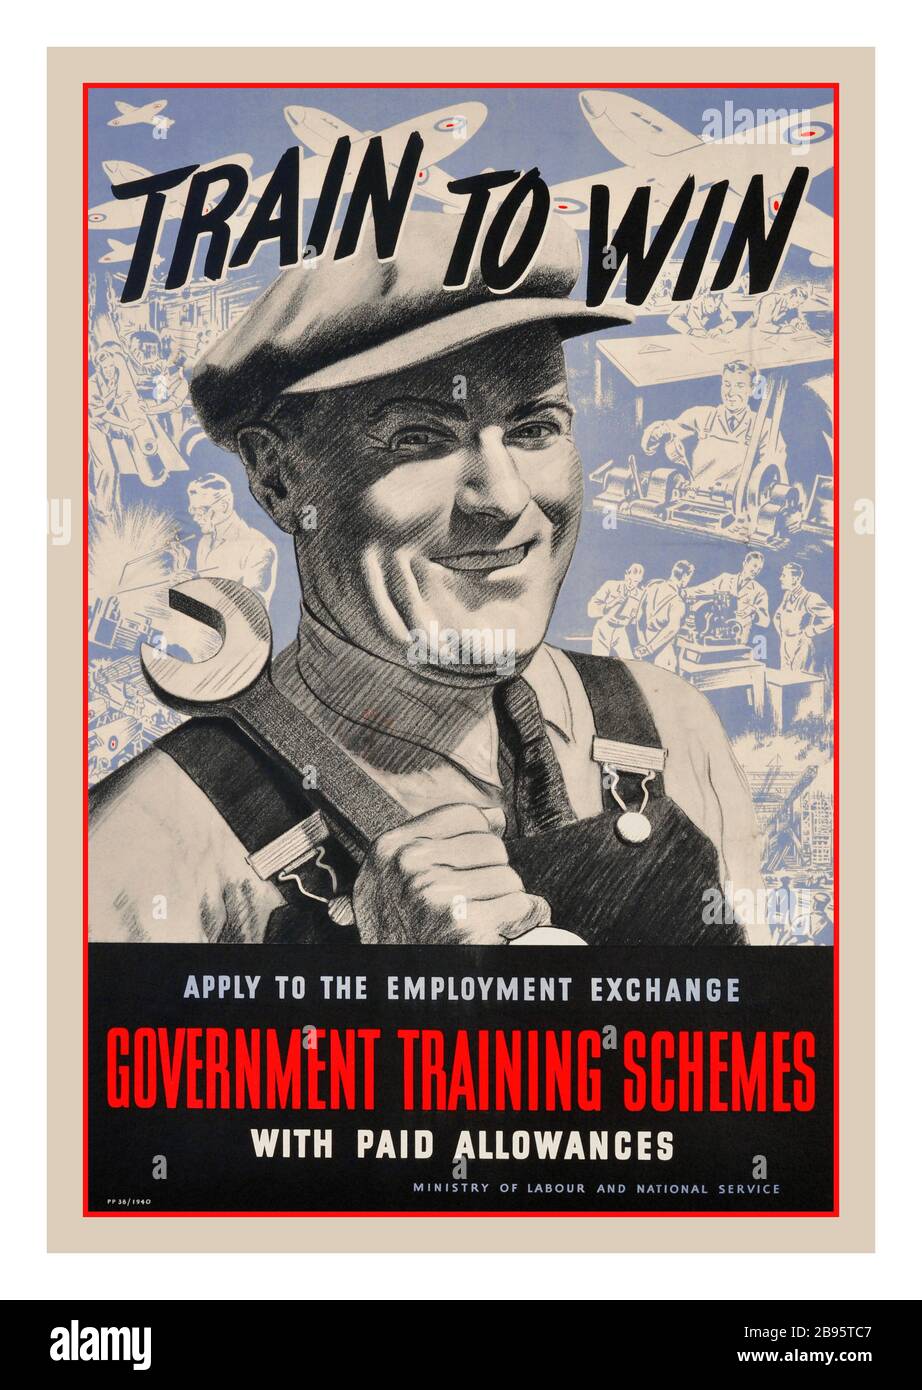 Vintage War Production Training UK World War Two poster: Train to Win - Apply to the Employment Exchange, Government Training Schemes with paid allowances - Ministry of Labour and National Service. Smiling worker wearing a flat cap and holding a spanner with planes and men working with industrial machines and on technical drawings in the background. Black and white sketch style on a blue and white background. 1940. Printed by J Weiner Ltd, 71/5 New Oxford Street, London WC1 for Her Majesty's Stationery Office. . Country: UK, 1940, Stock Photo